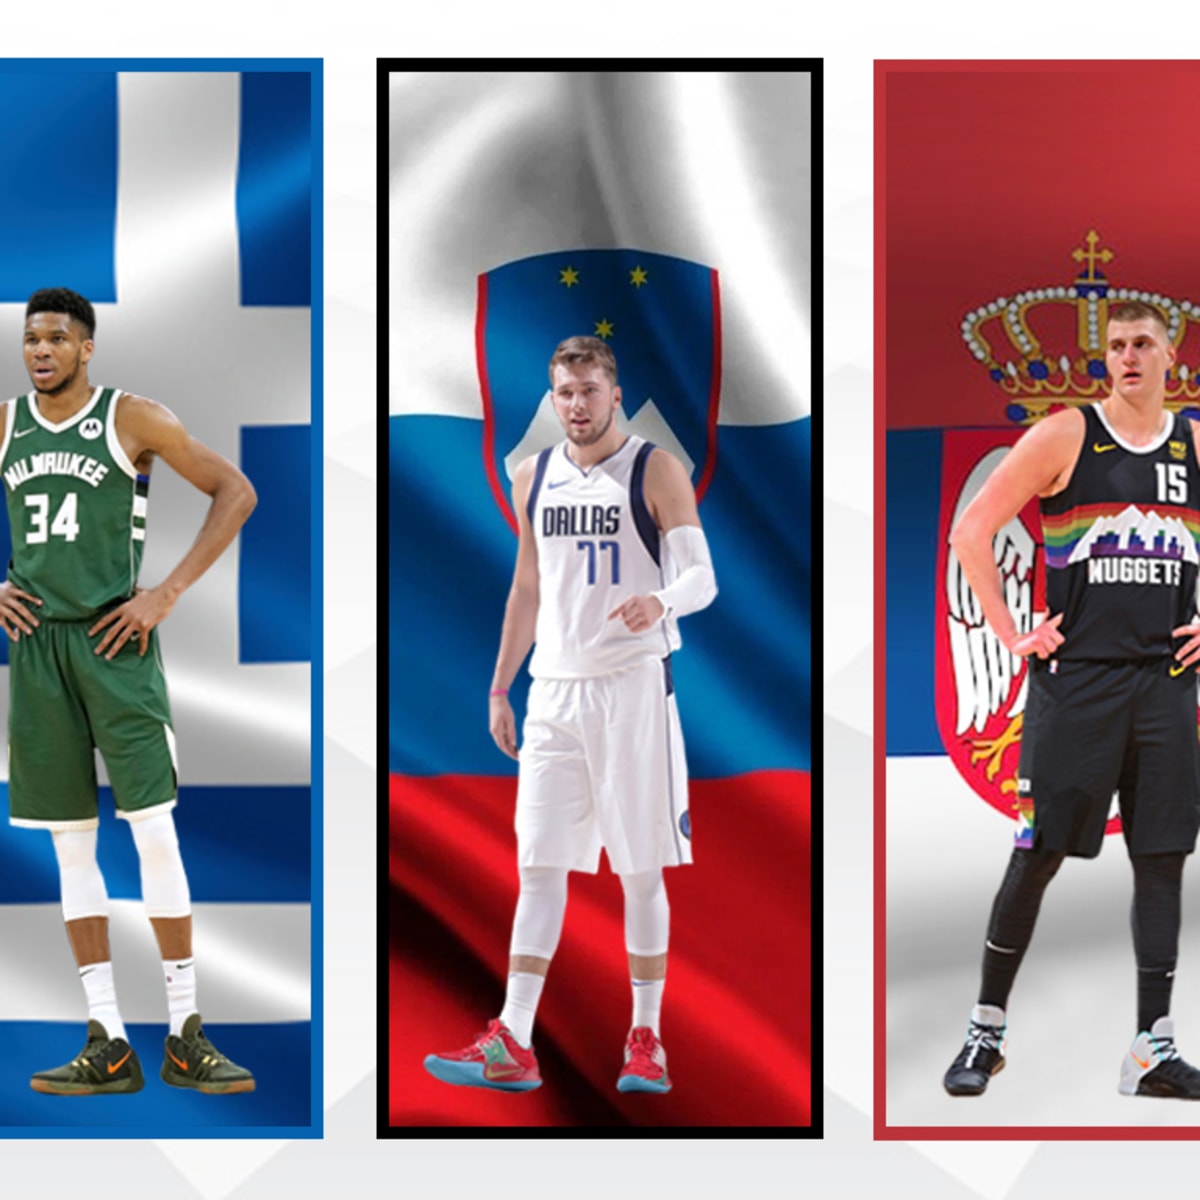 List Of NBA Players Who Will Play In The 2022 EuroBasket Giannis Antetokounmpo, Luka Doncic And Nikola Jokic Lead The List